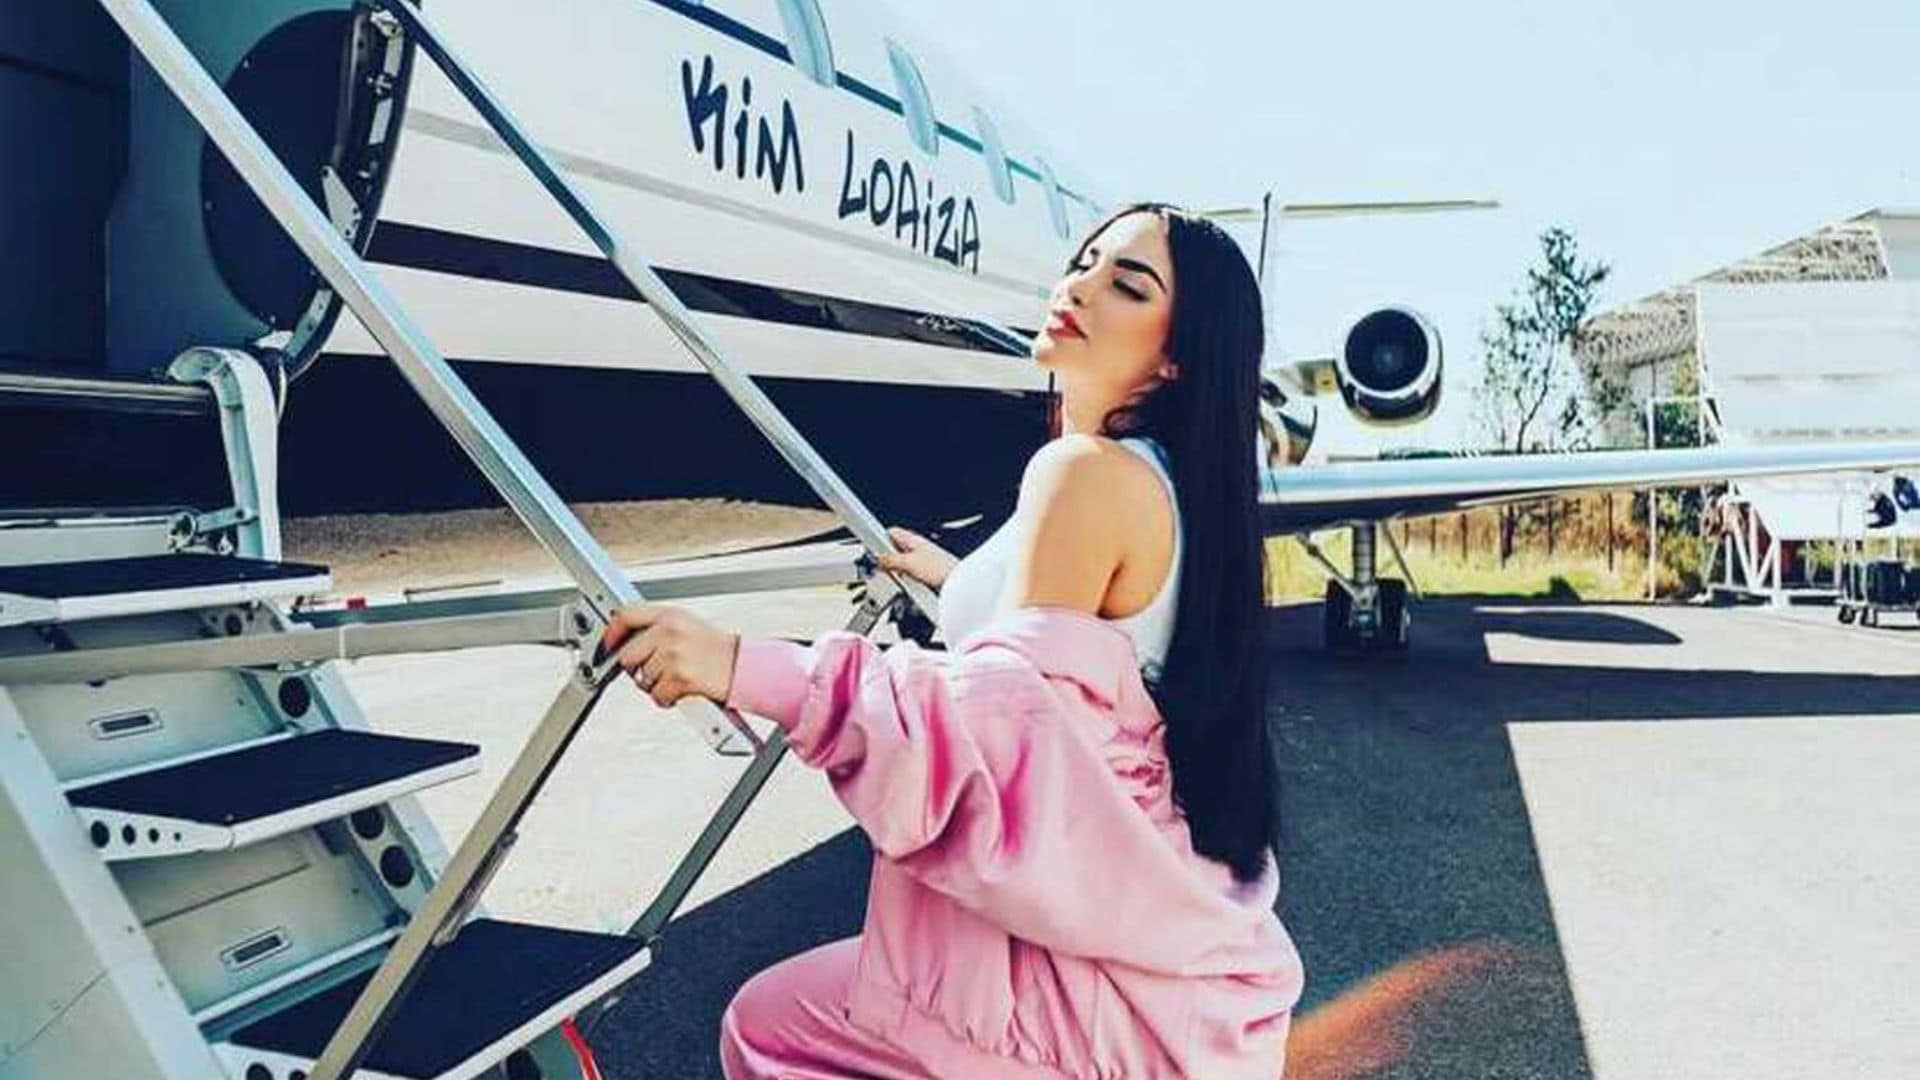 Kimberly Loaiza welcomes top influencers into her private jet to enjoy the ‘KLFest’